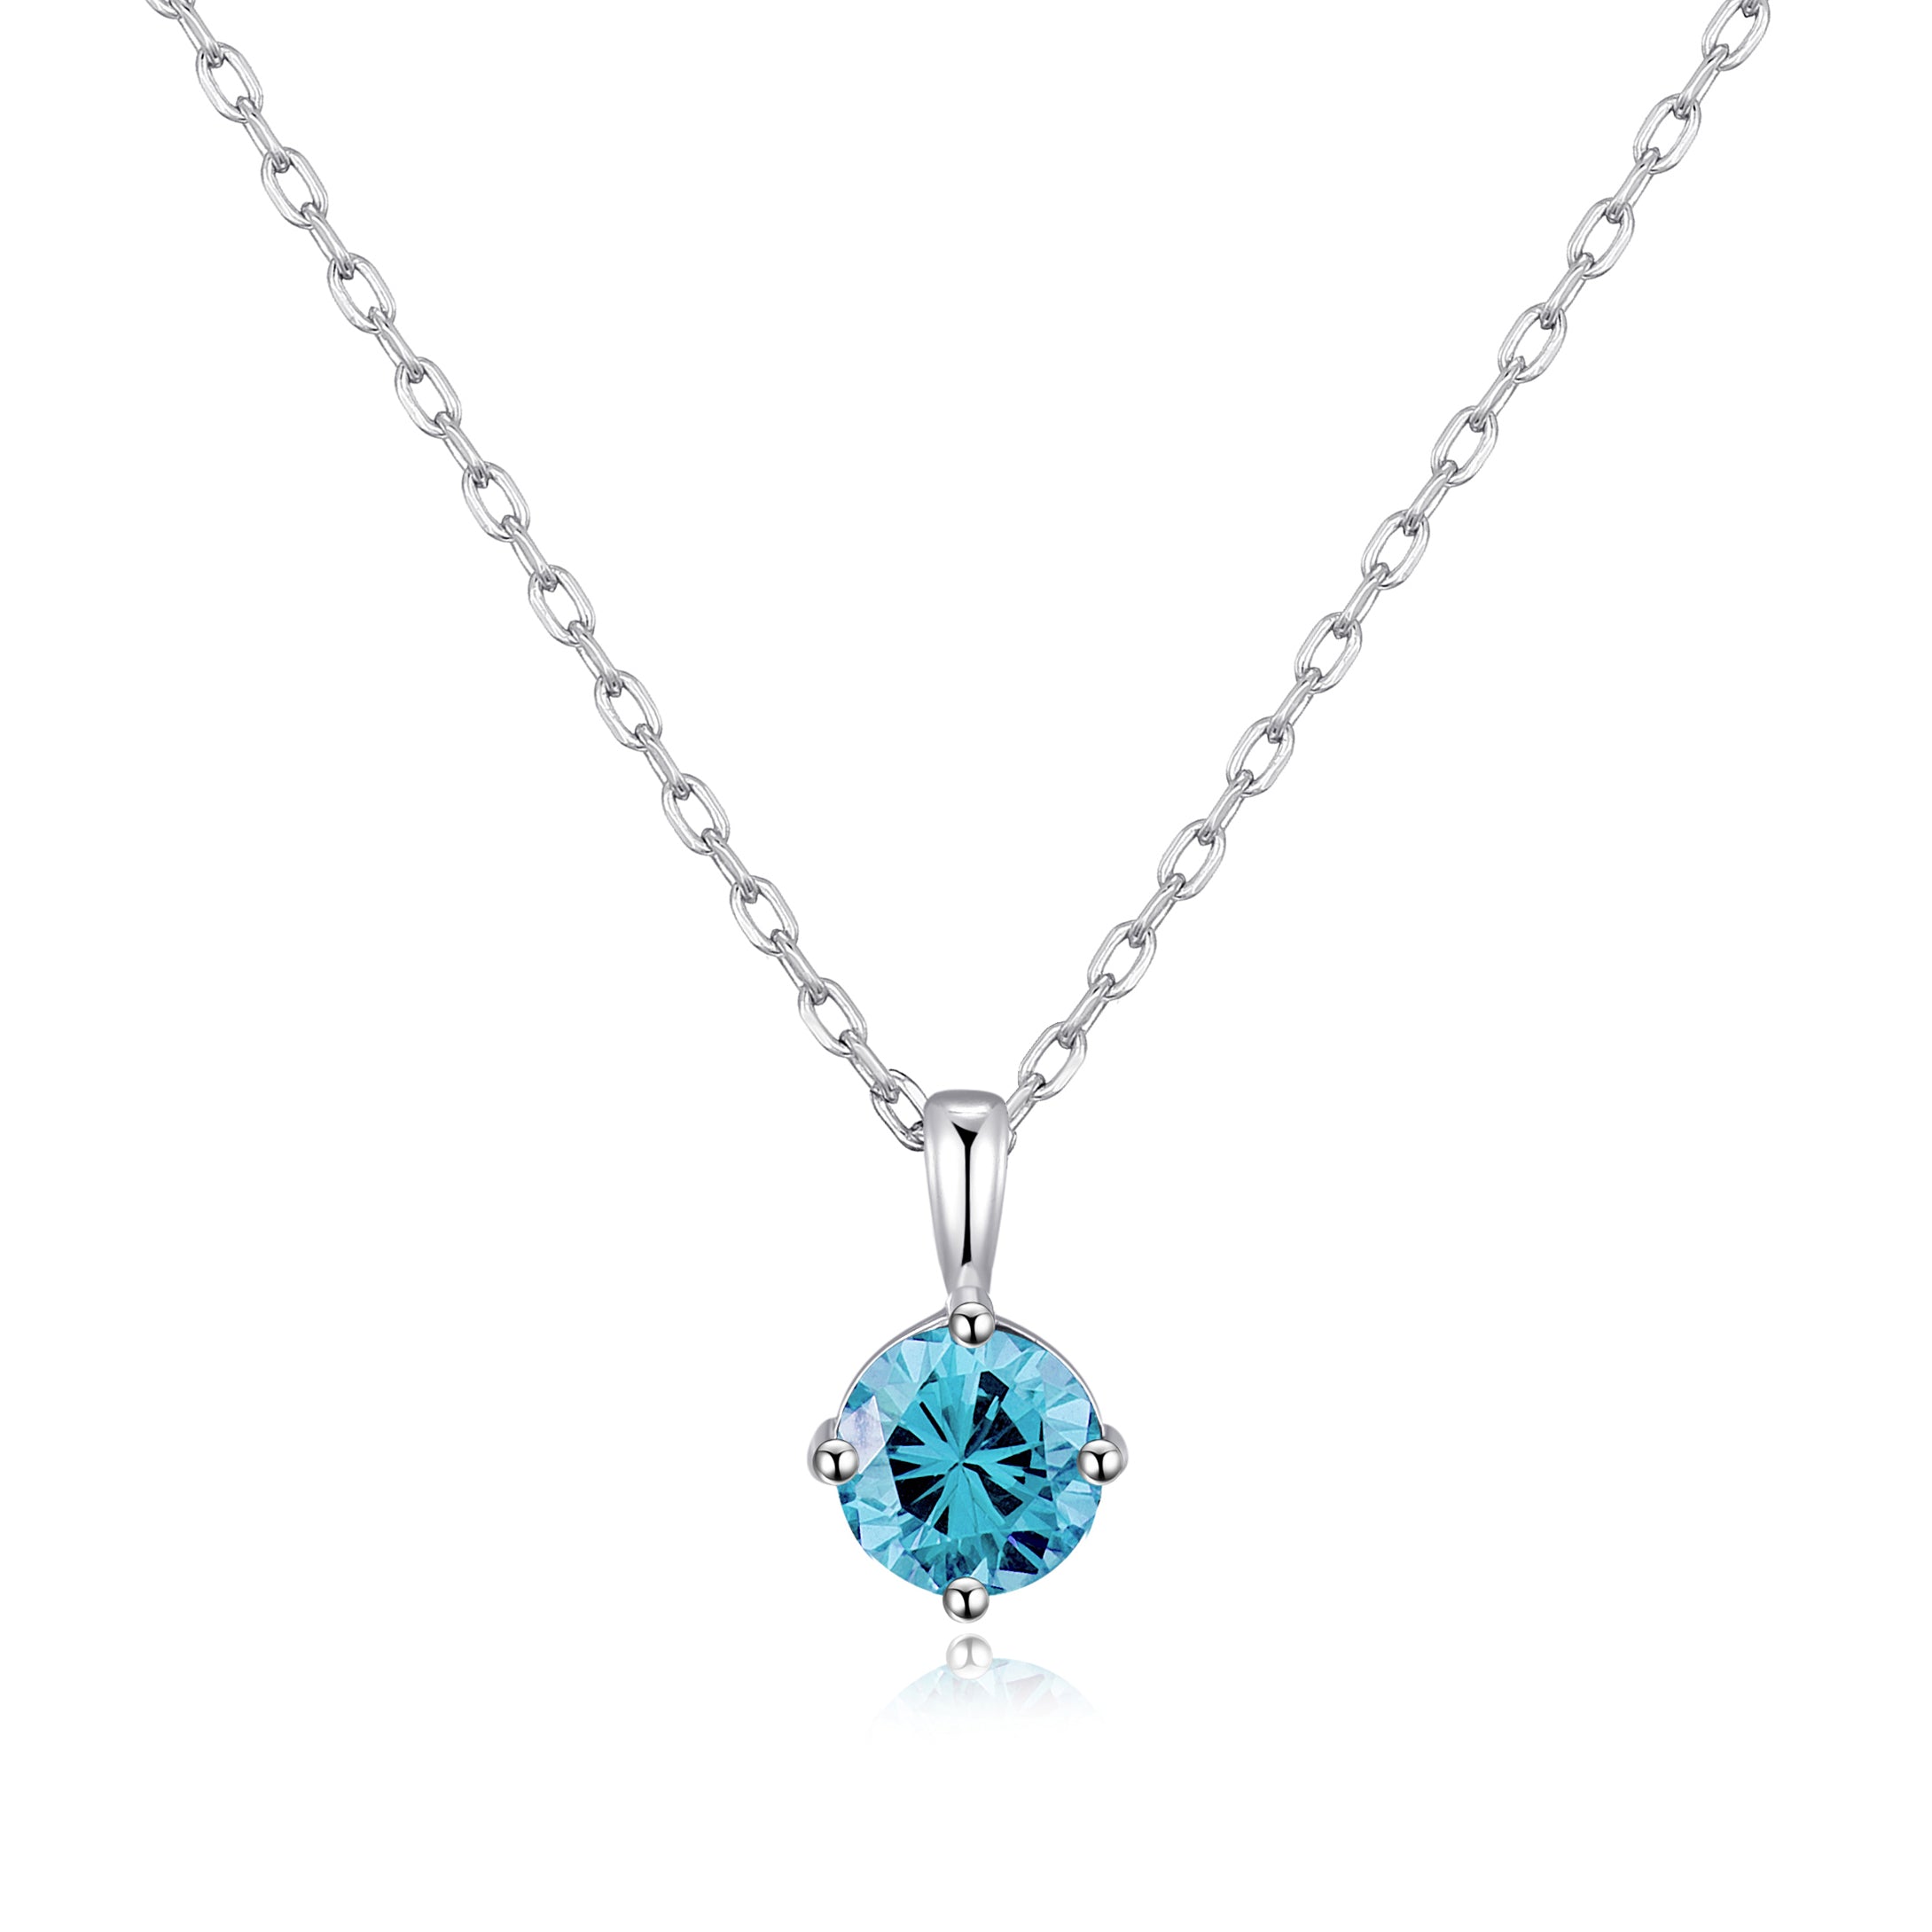 Sterling Silver March (Aquamarine) Birthstone Necklace Created with Zircondia® Crystals by Philip Jones Jewellery